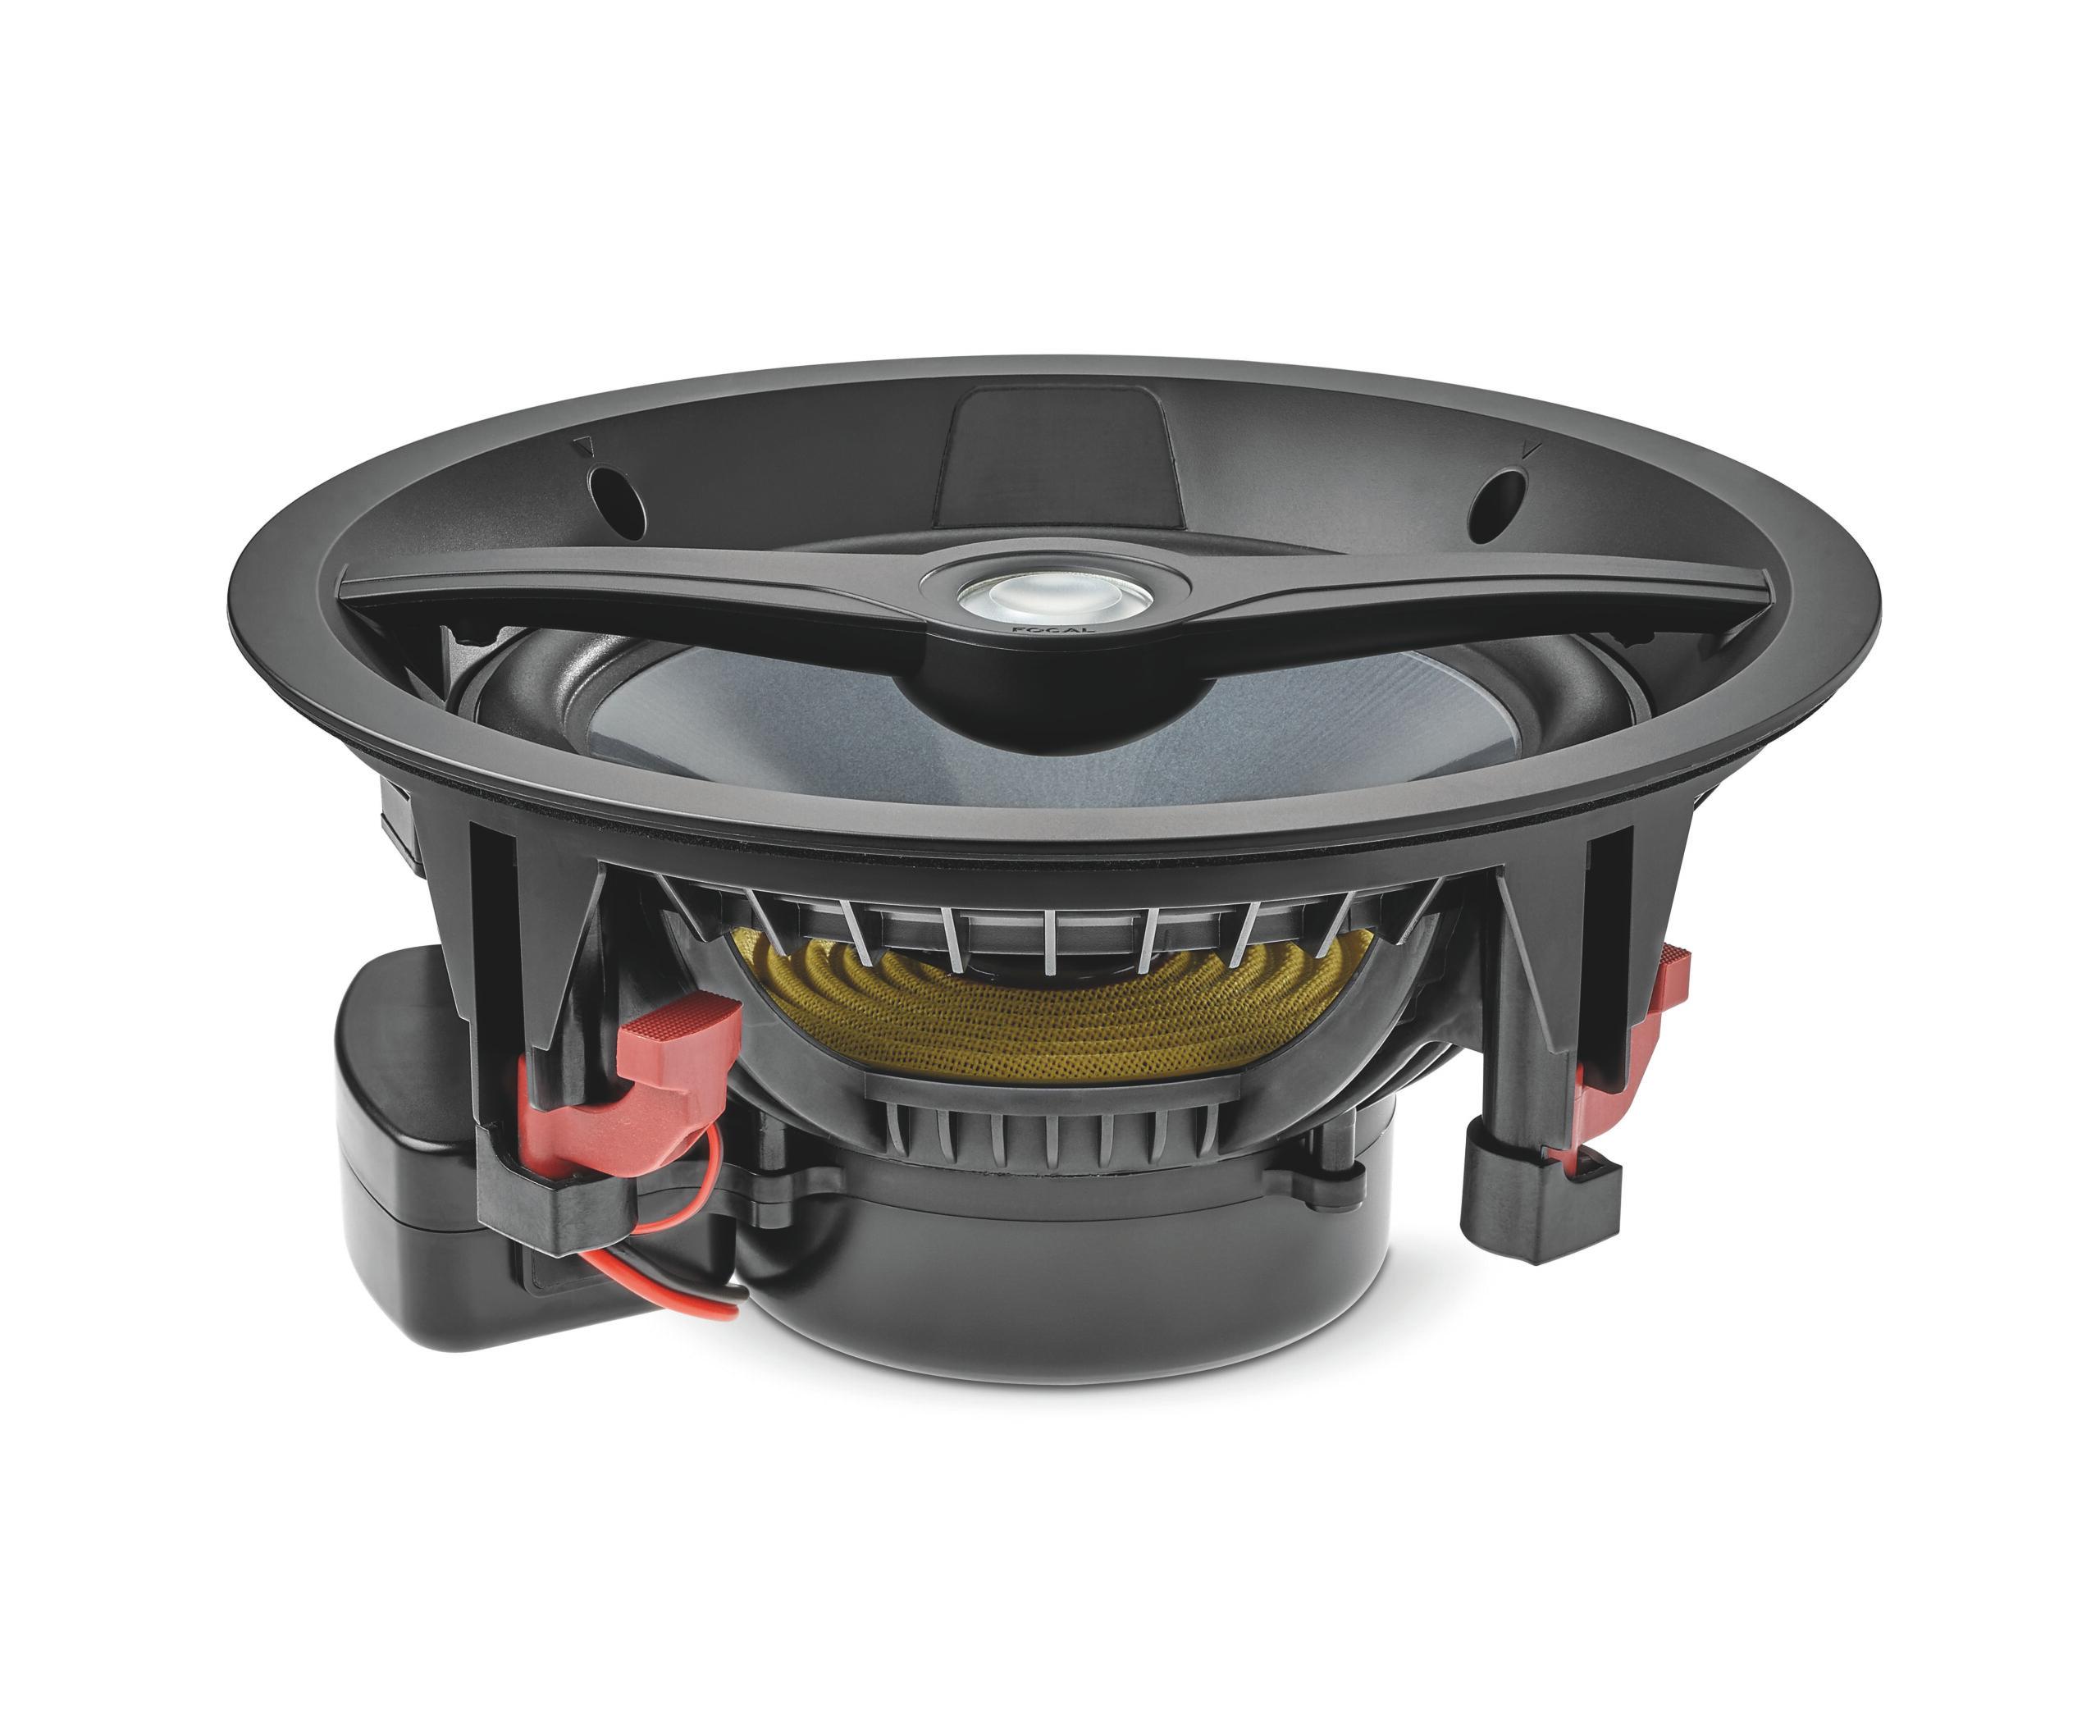 Focal's newest speaker line is designed for demanding saltwater environments, and include both full range and subwoofer models. b0655394 2oo icw8 littora prof scaled